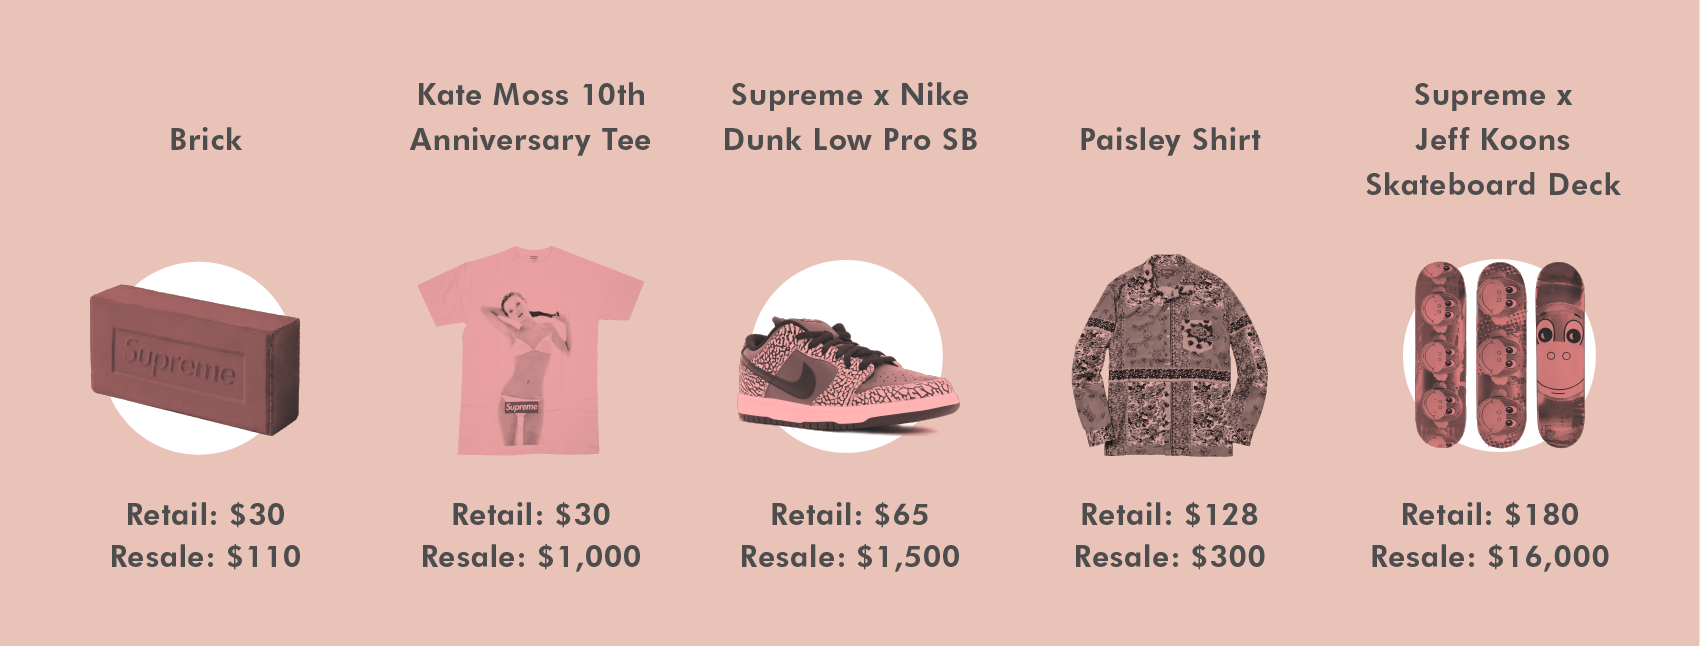 Supreme Is the Most Valuable Brand on the Resale Market, Study Says – Robb  Report